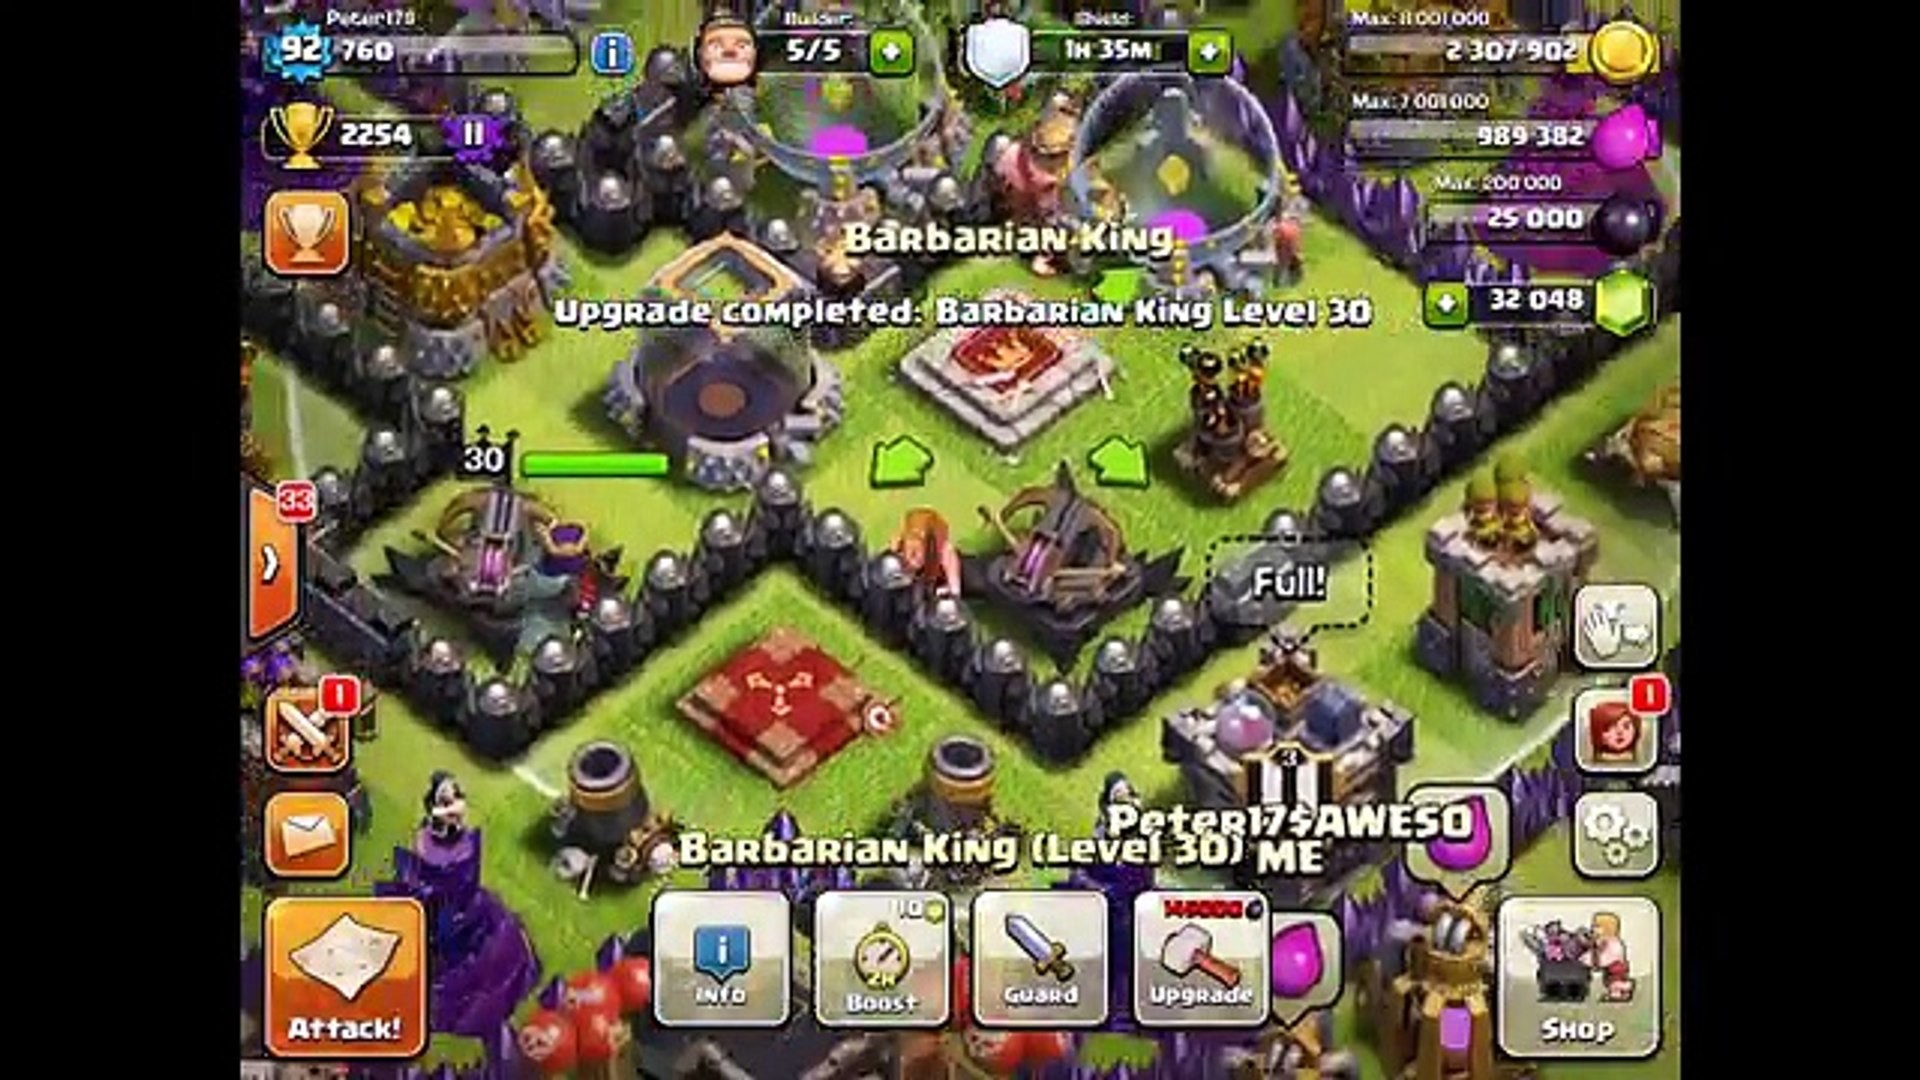 1920x1080 Clash of Clans MASSIVE Gemming 52,000 Gems - Barbarian King Grows Up! -  video dailymotion